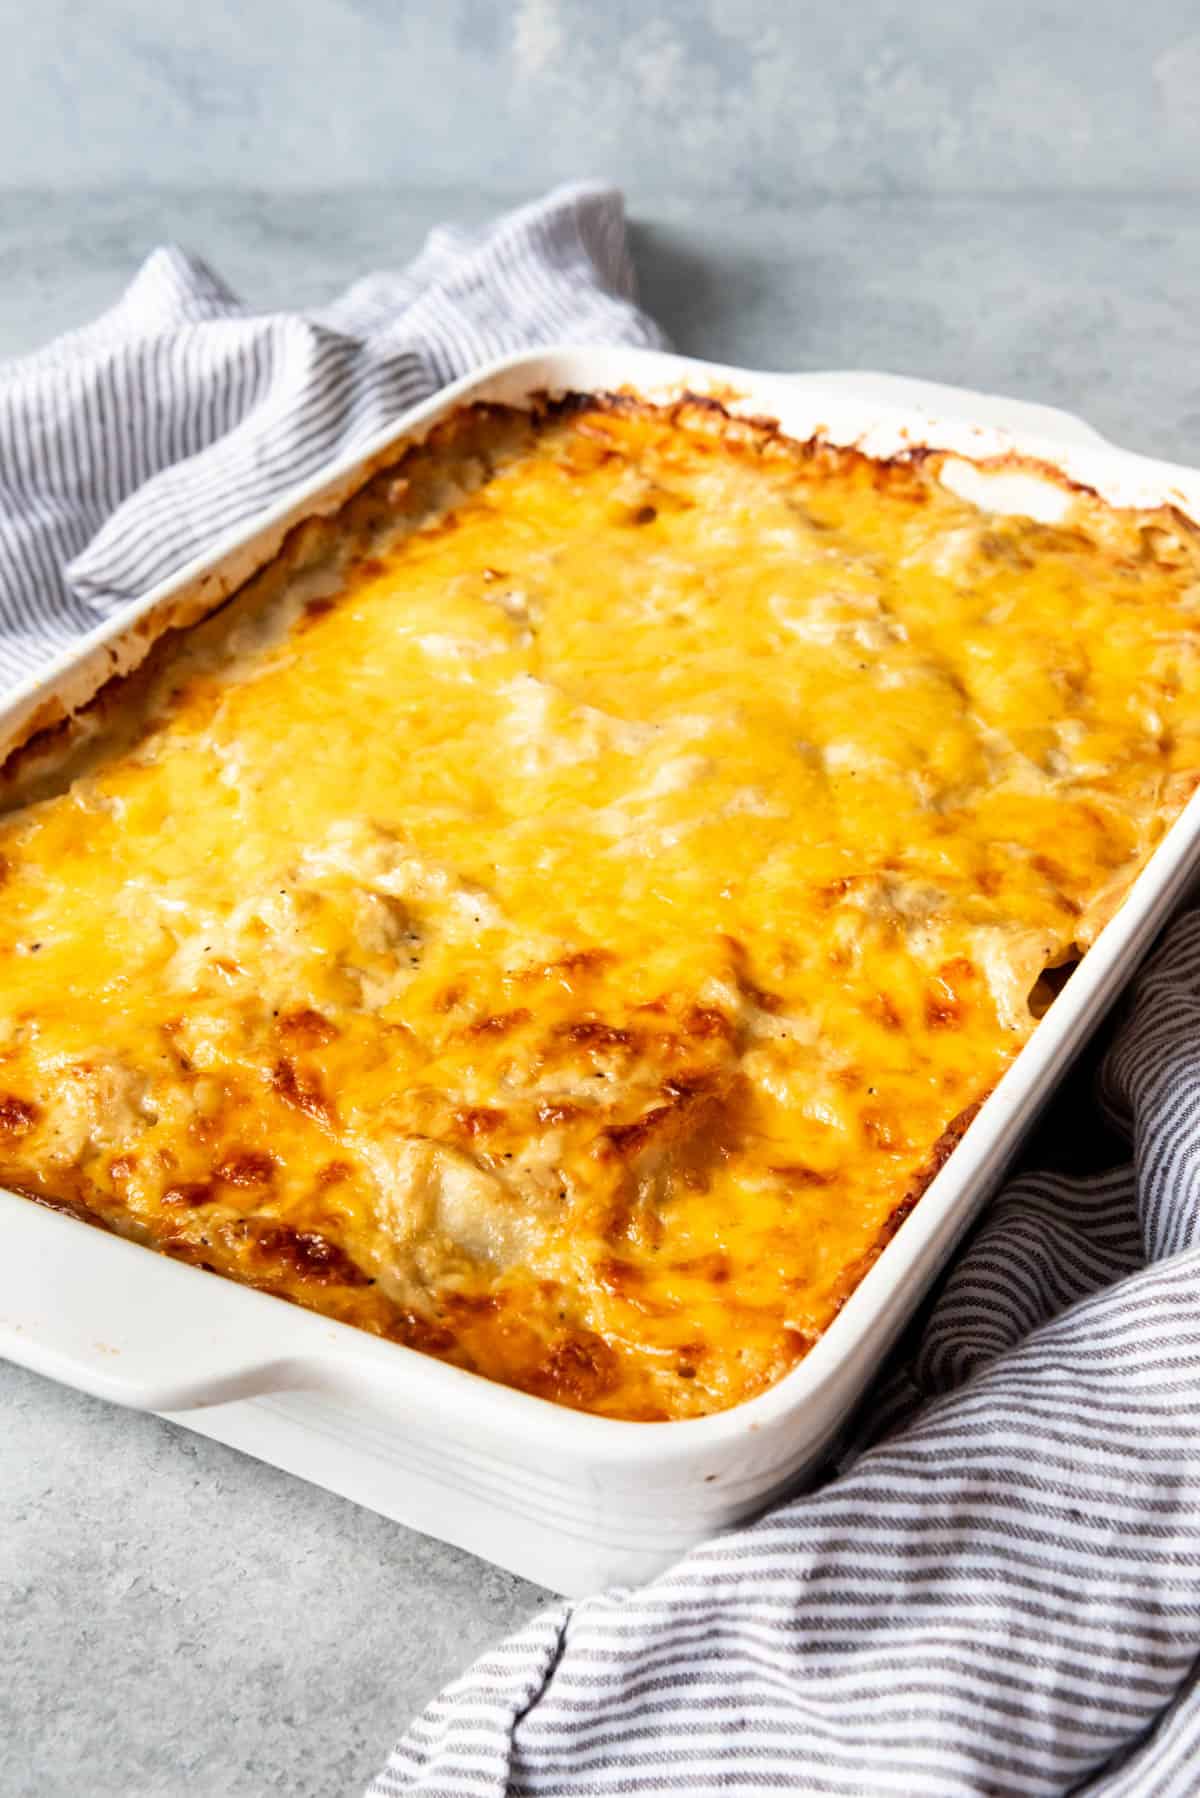 A large pan of au gratin potatoes with a golden brown cheesy crust on top.